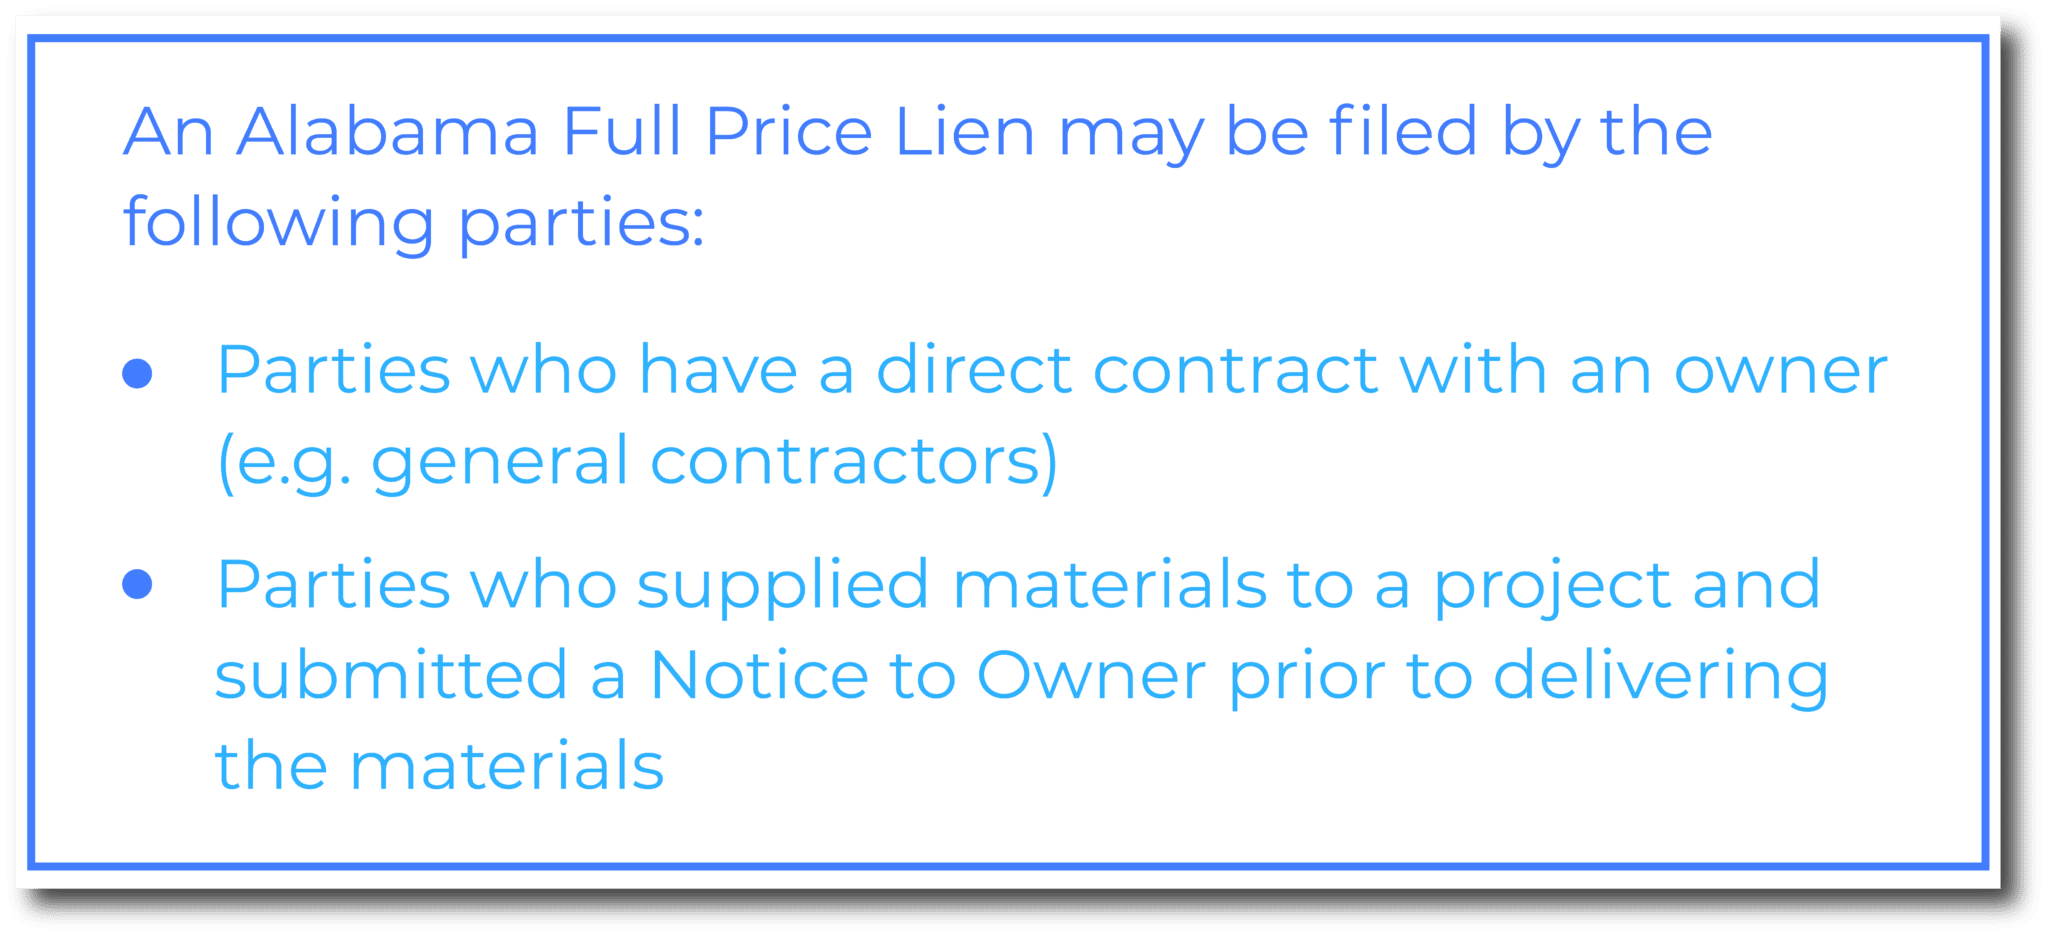 Who can file a Full Price Lien in Alabama